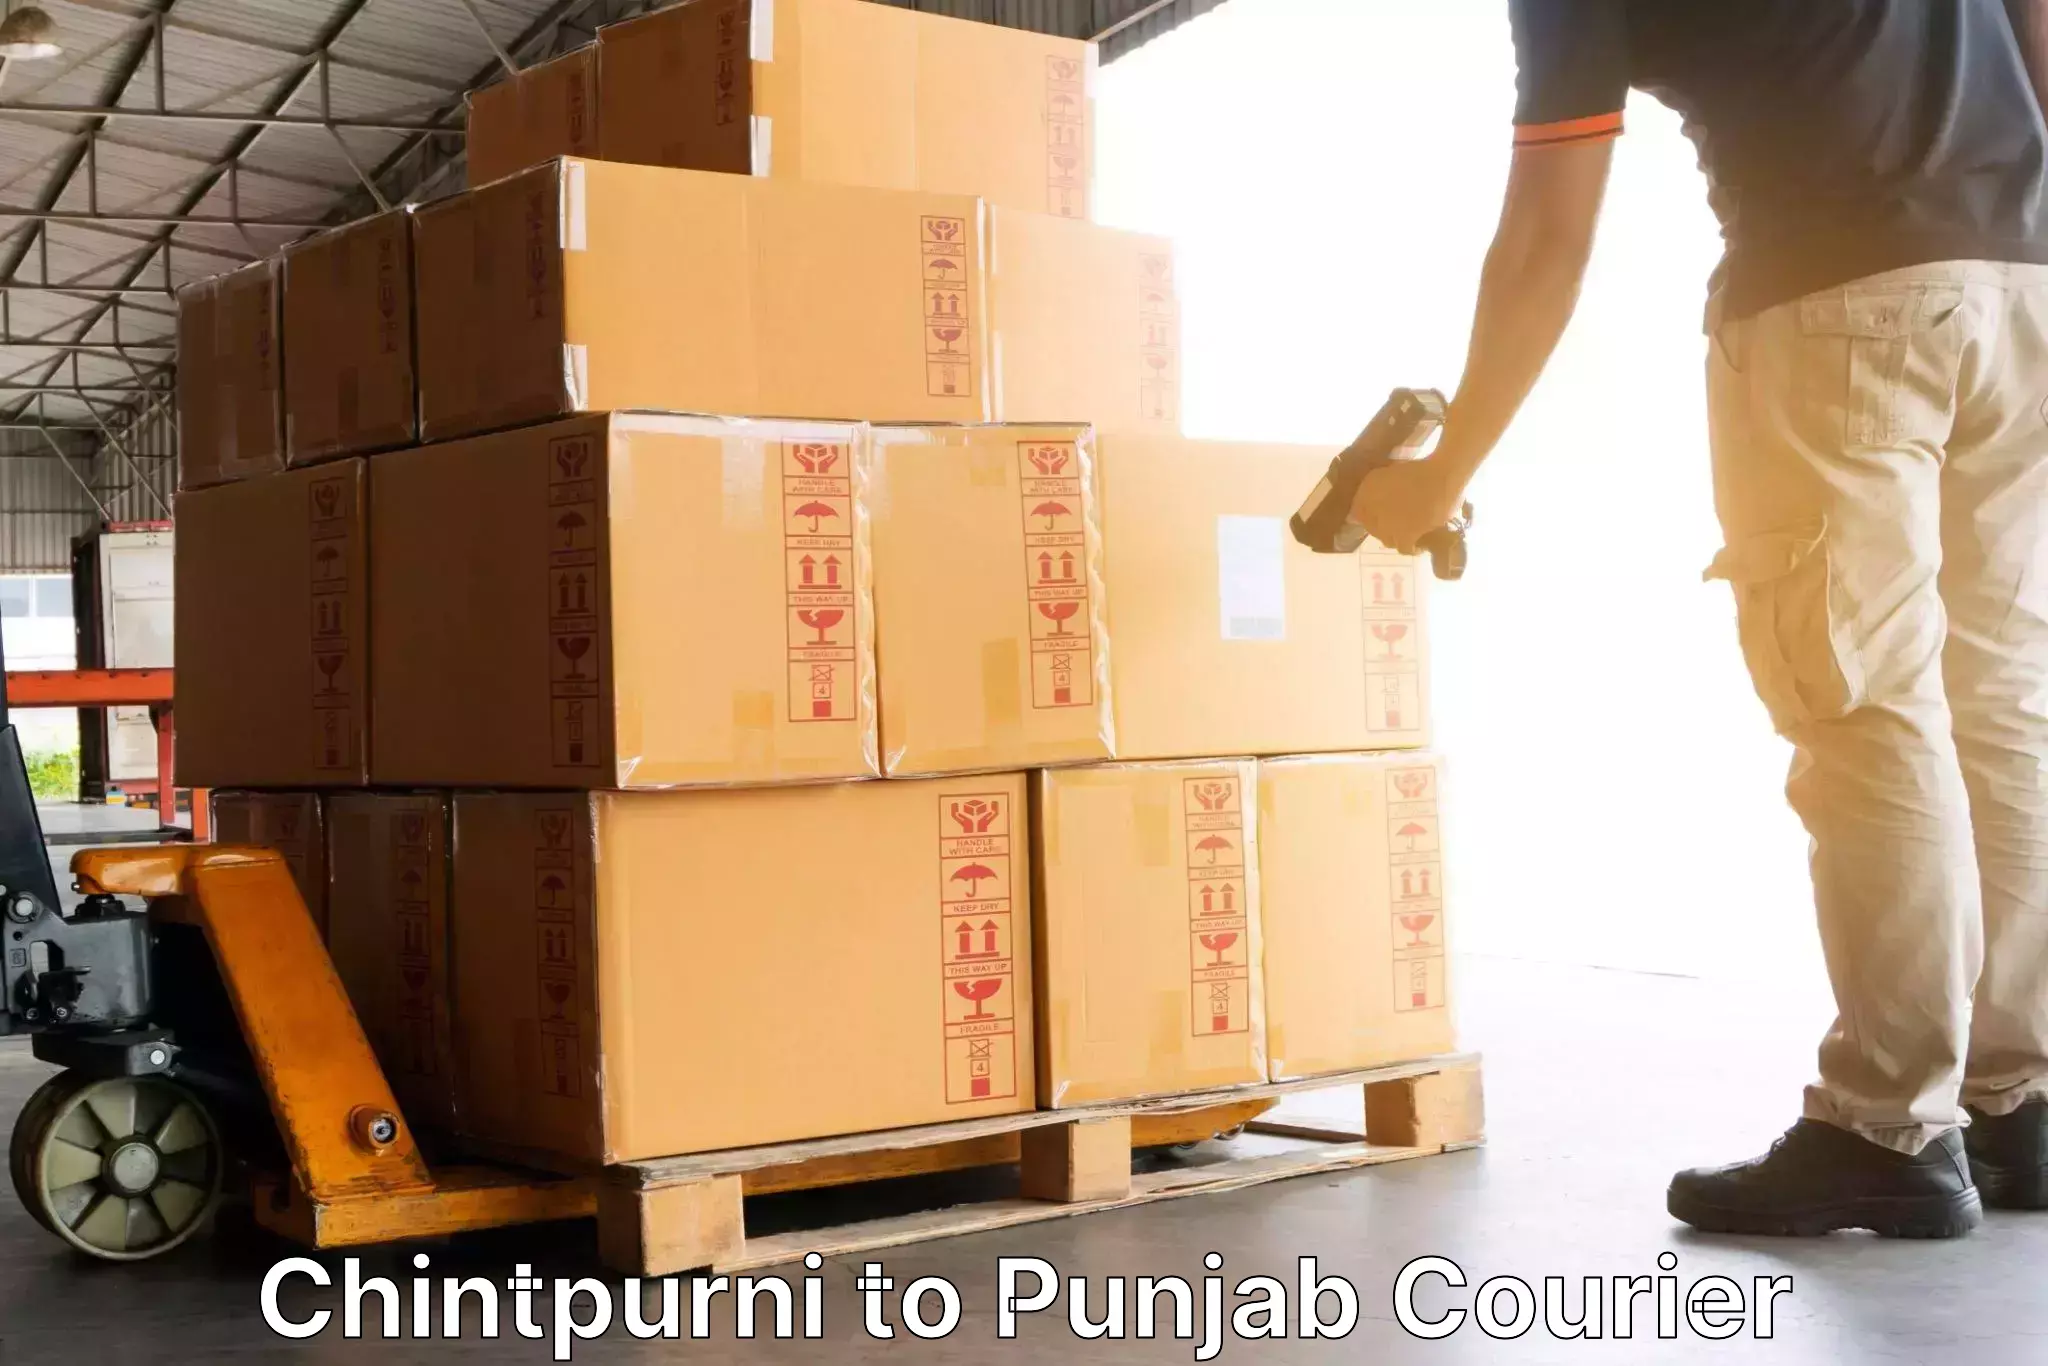 High-speed delivery Chintpurni to Punjab